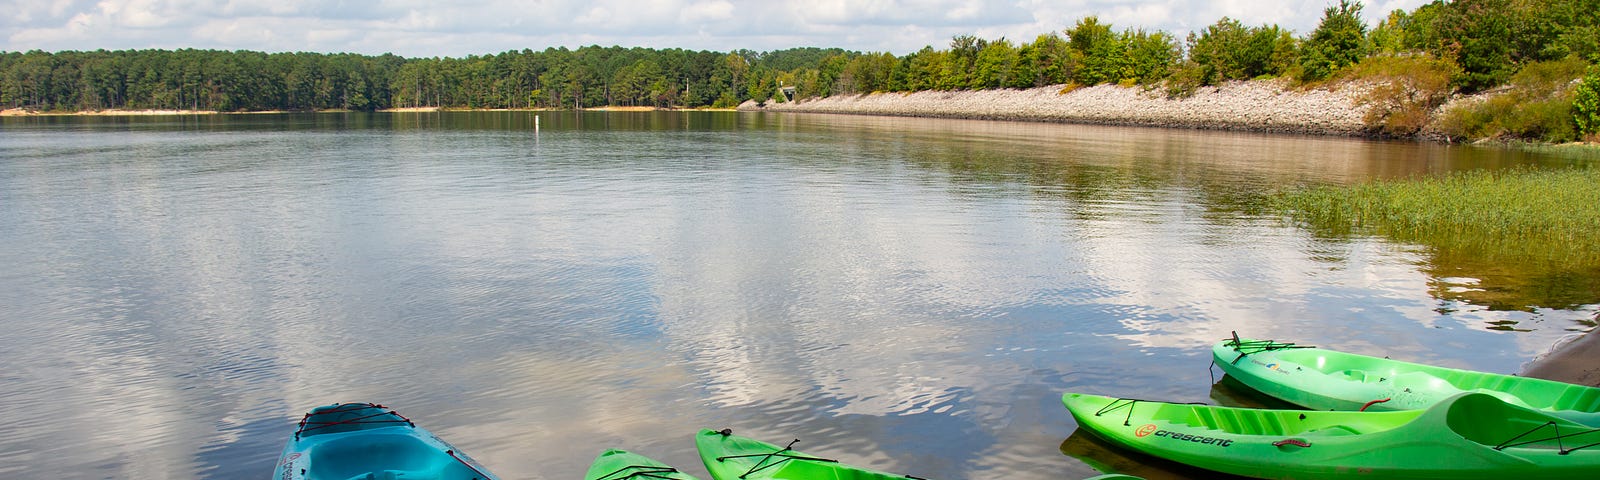 Five kayaks sitting along the bank of Jordan Lake, the trees and clouds outstretched along the horizon.